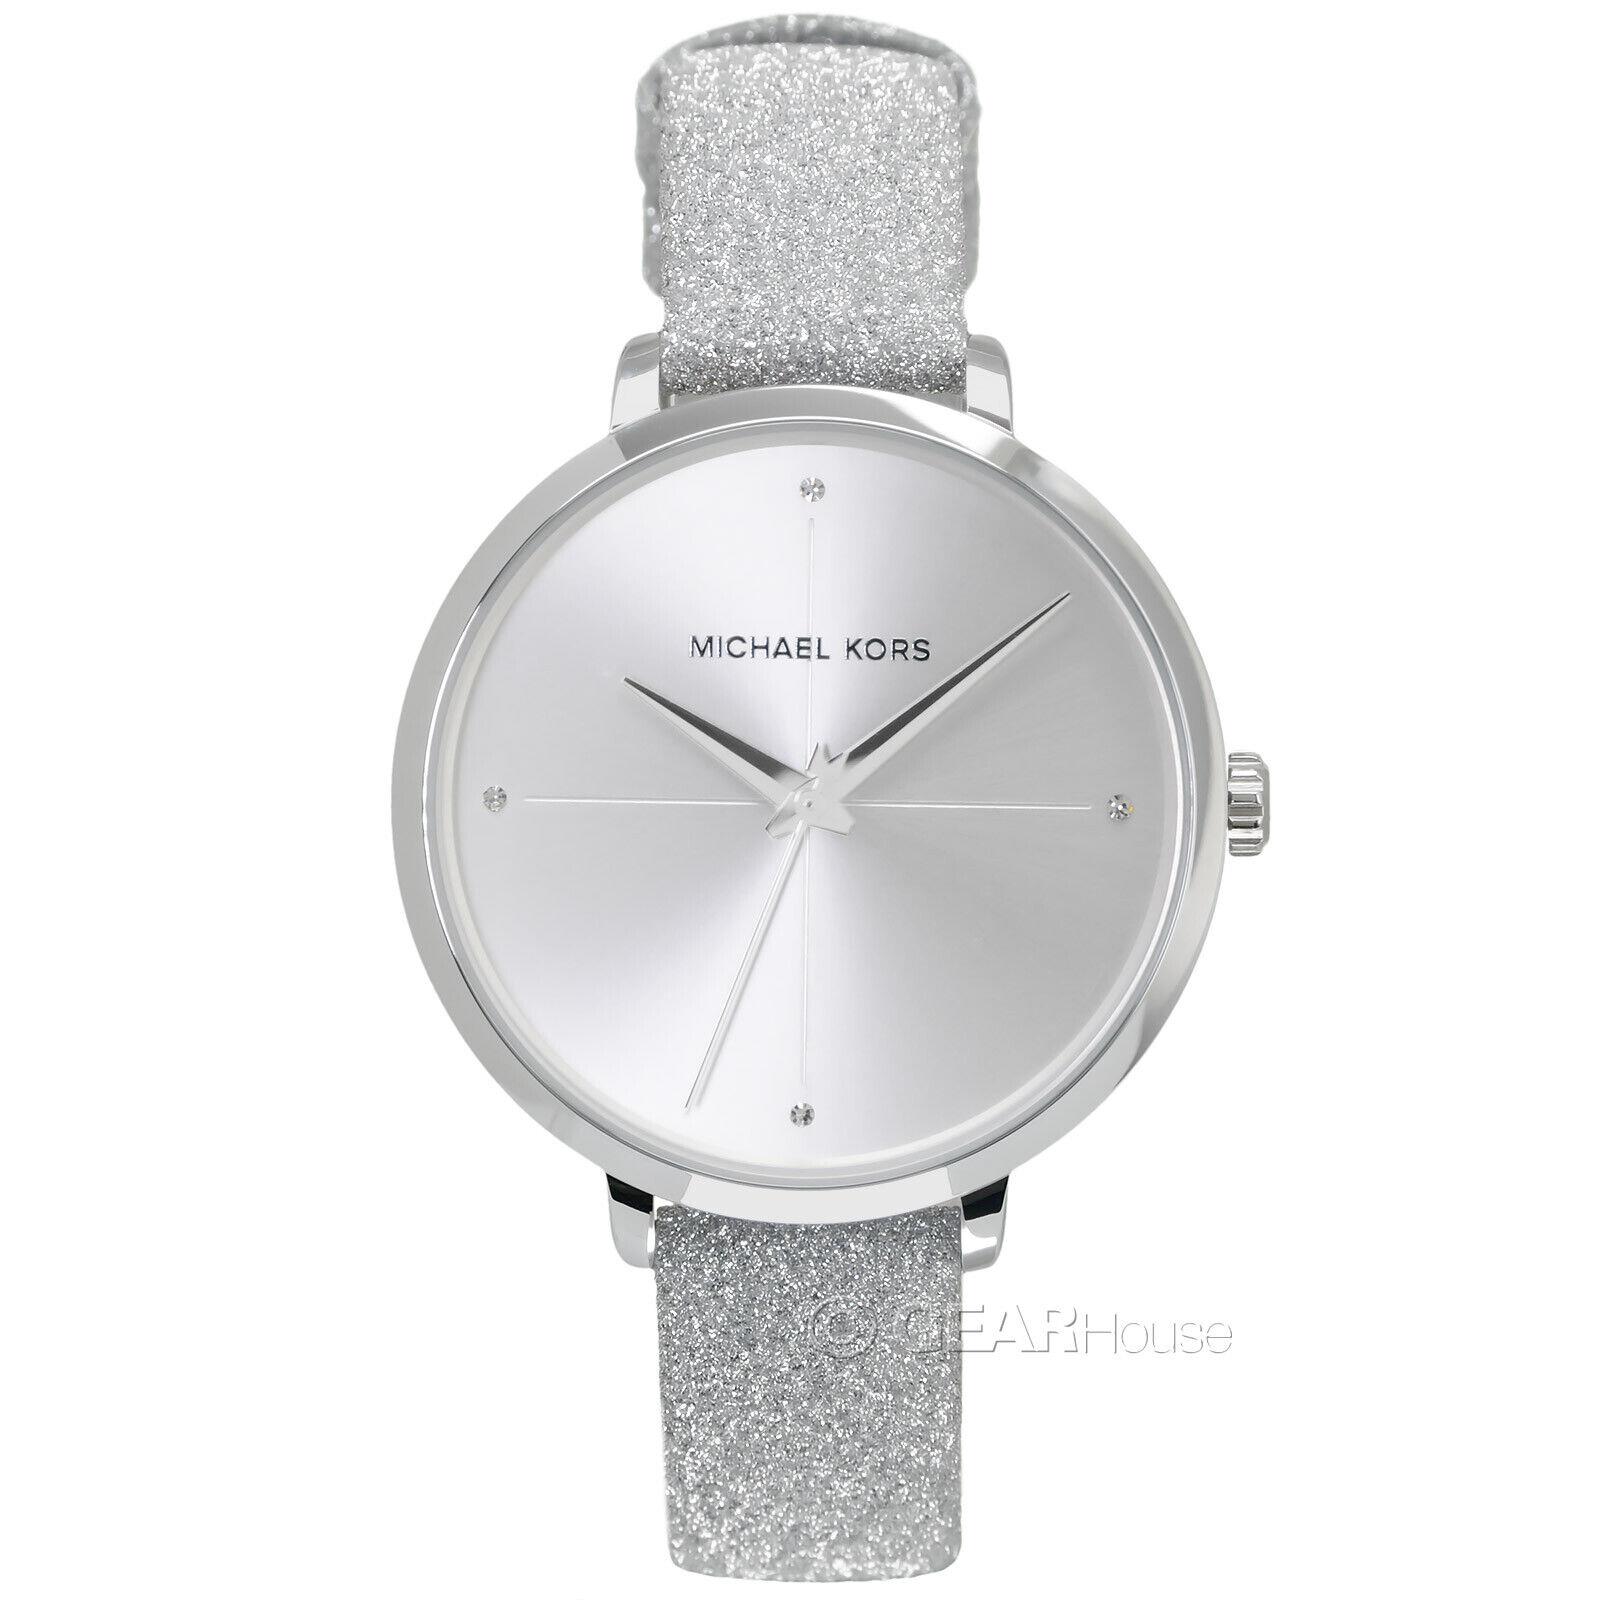 Michael Kors Charley Womens Watch Sparkle Glitter Silver Leather Band Crystals - Silver Dial, Silver Band, Silver Bezel